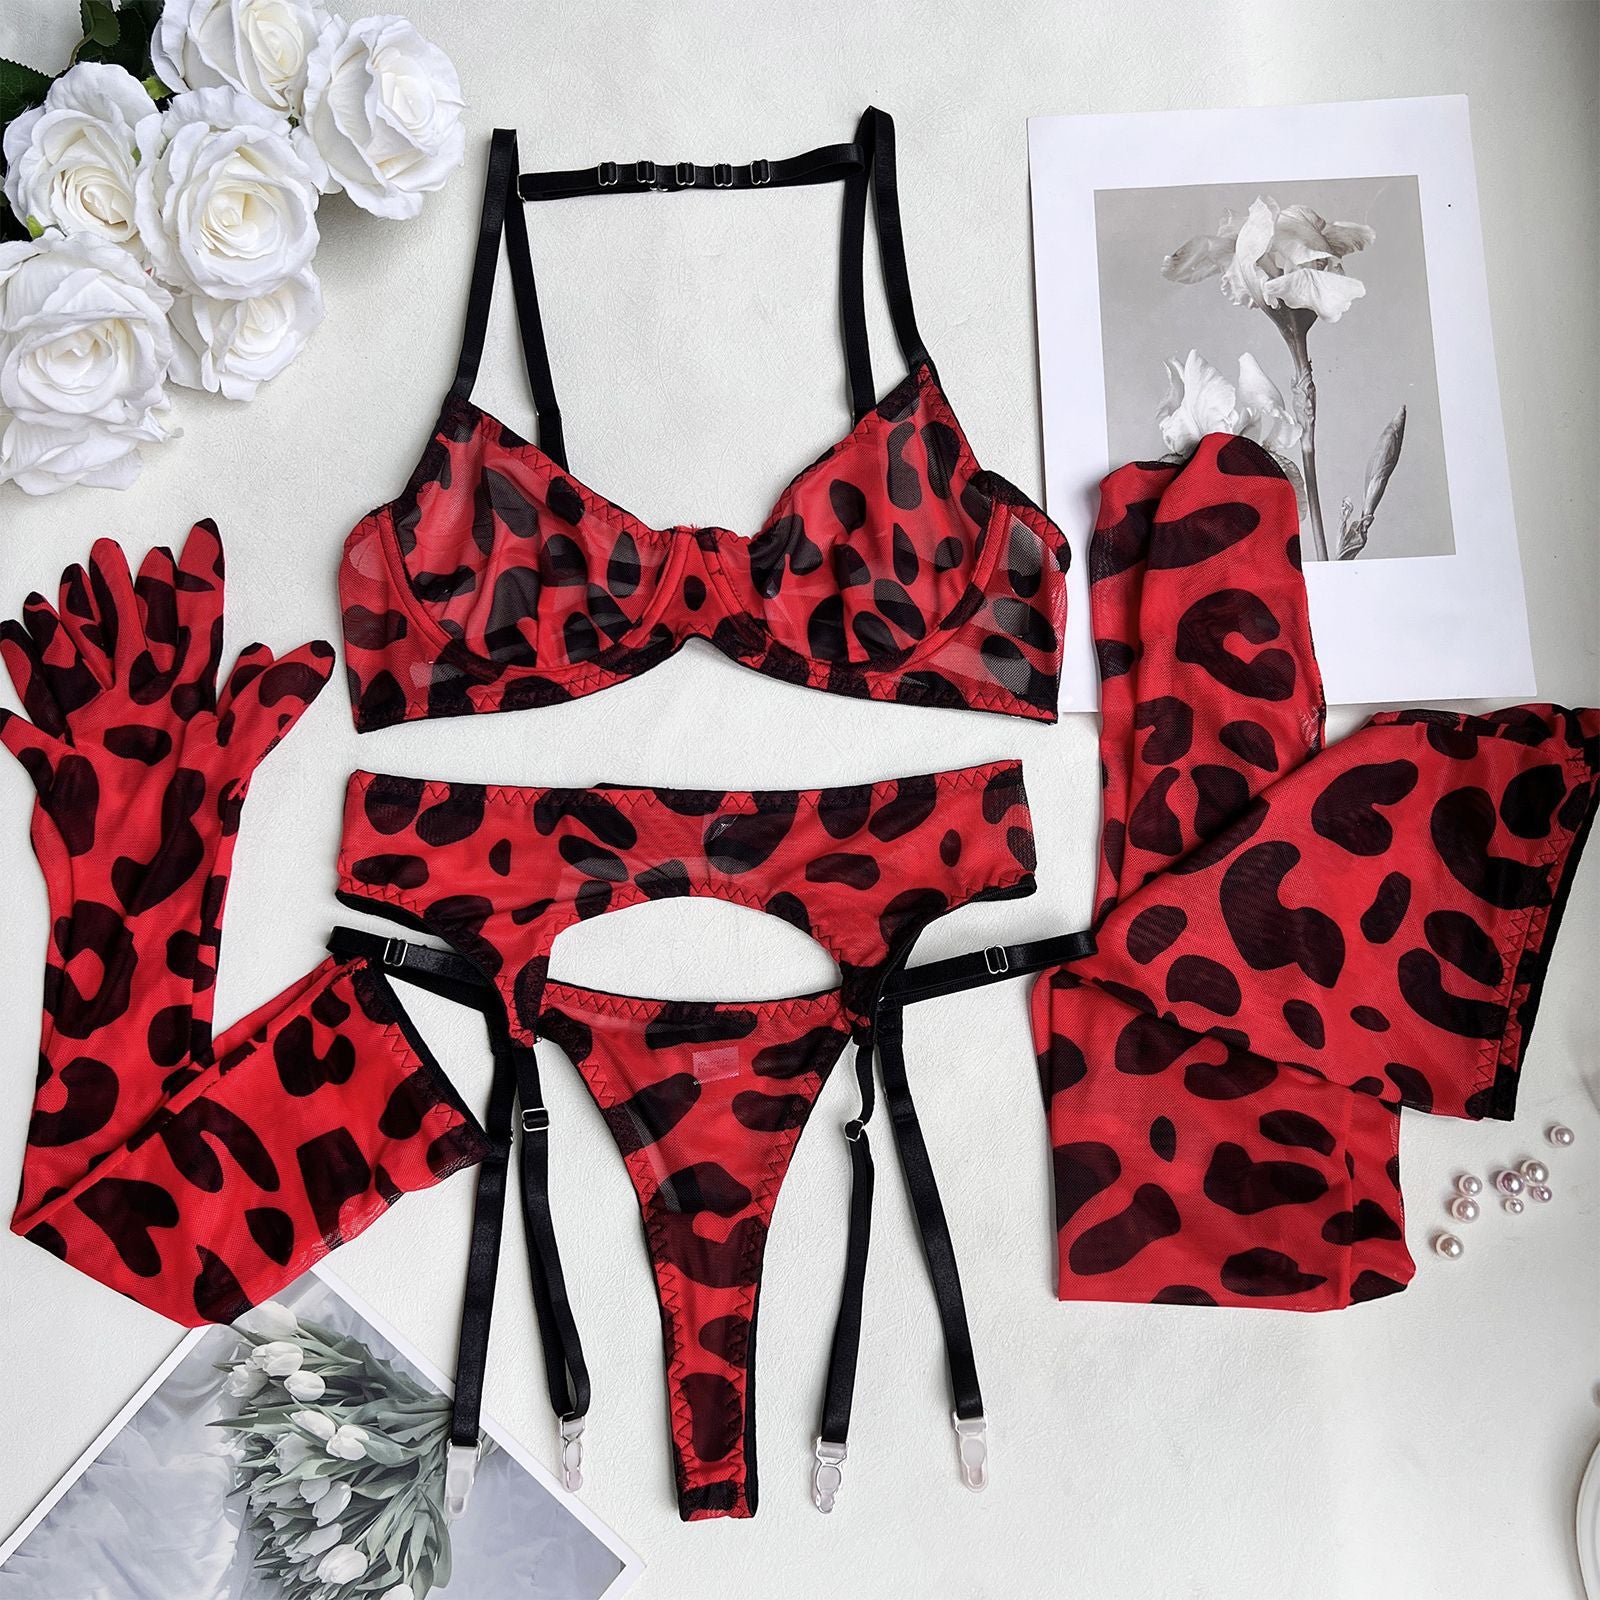 Leopard Luxe Sheer Mesh Lingerie Set with Matching Accessories